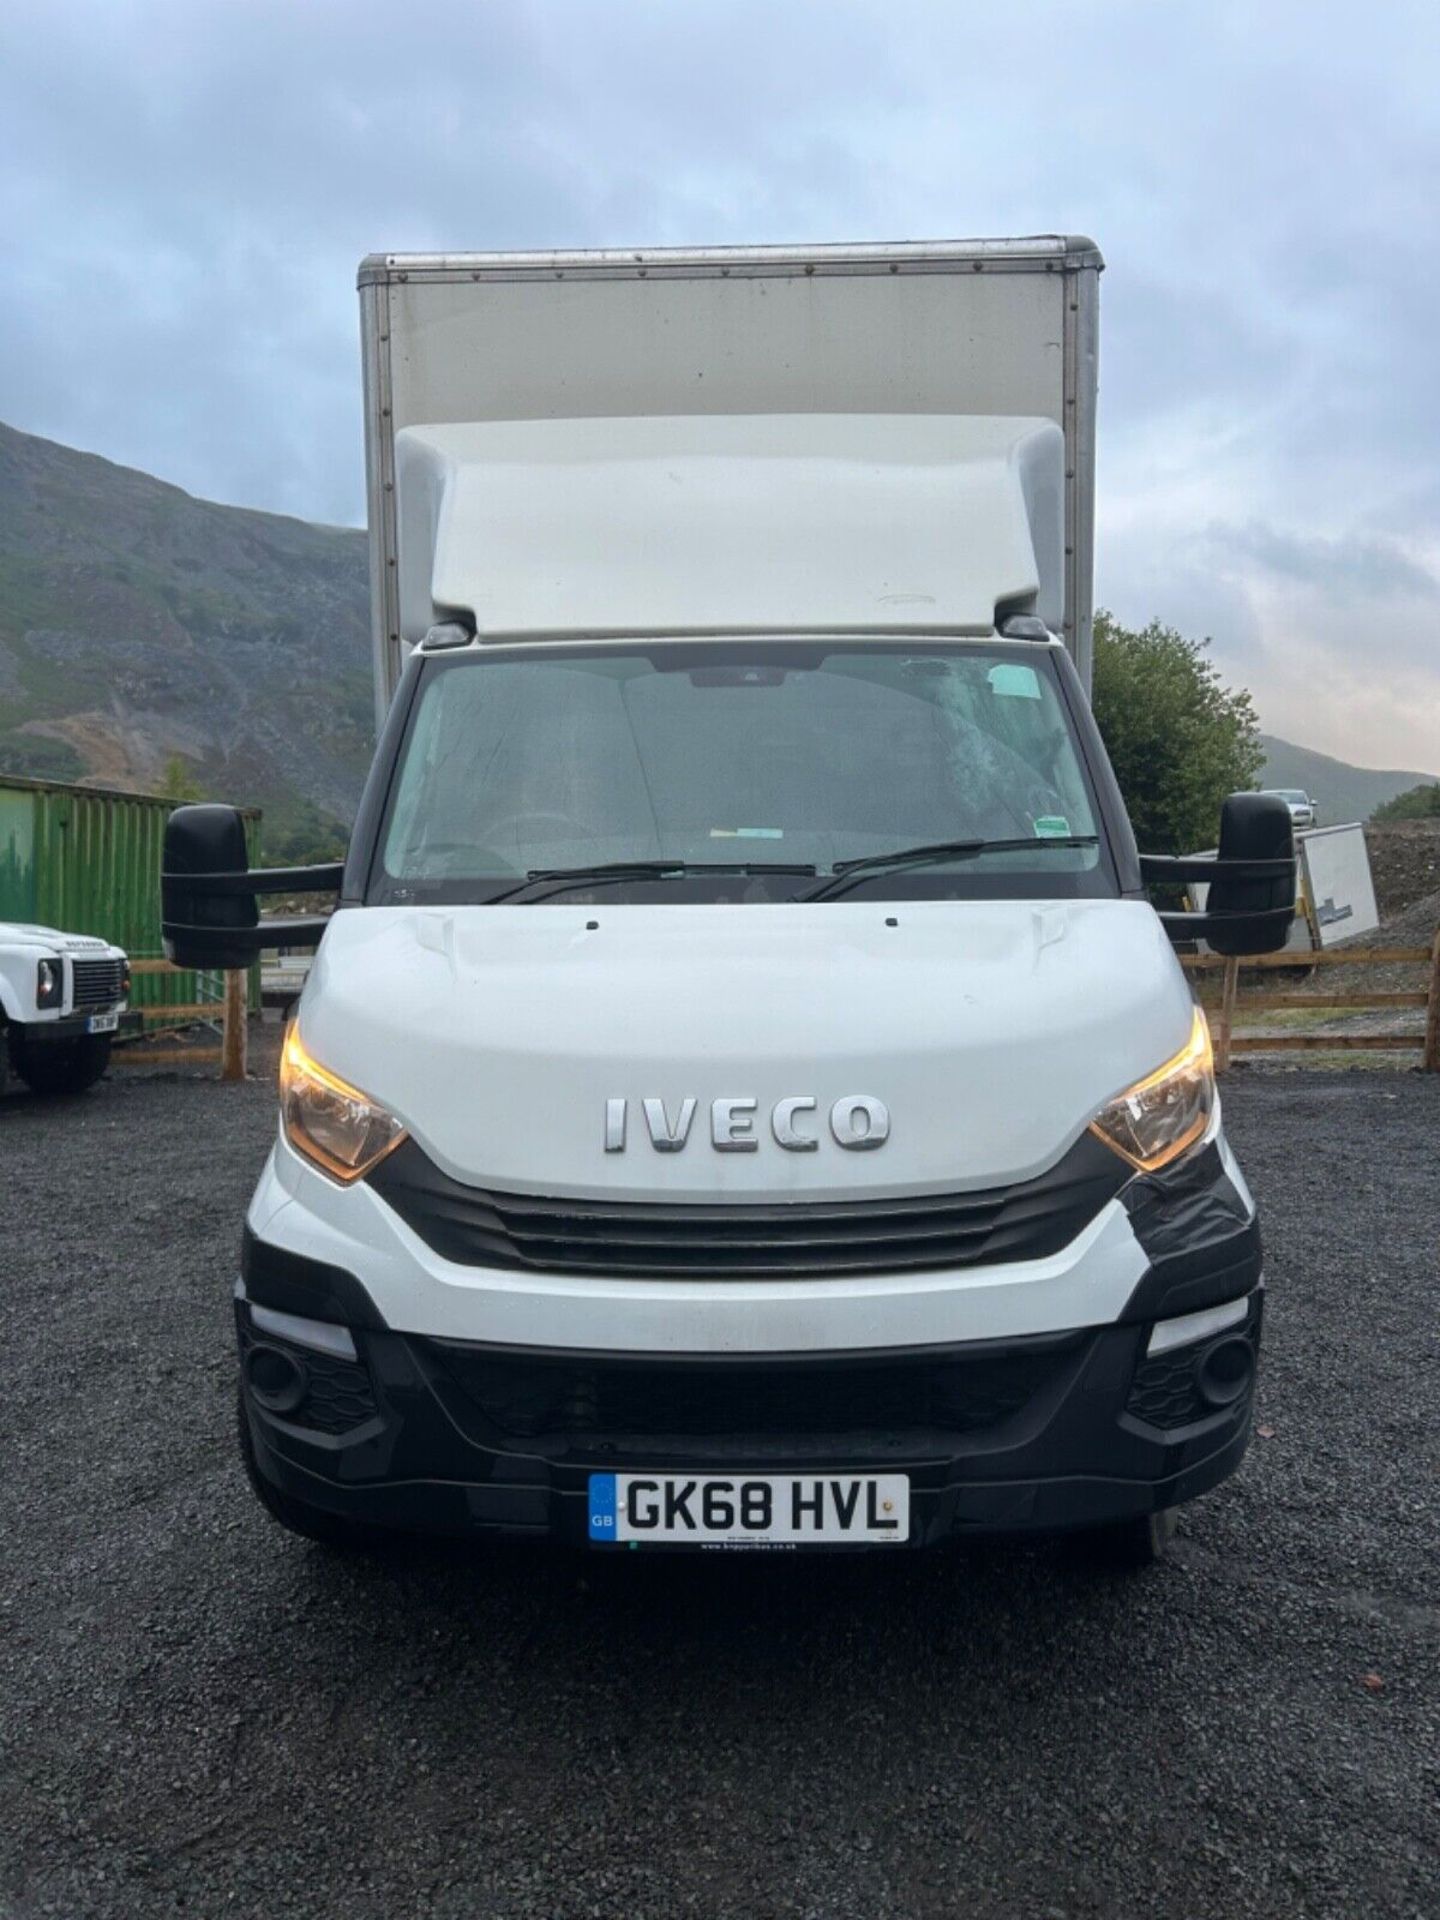 2018 IVECO DAILY 70C18 LUTON BOX VAN 7 TON LORRY TAIL LIFT RECOVERY TRUCK - Image 2 of 9